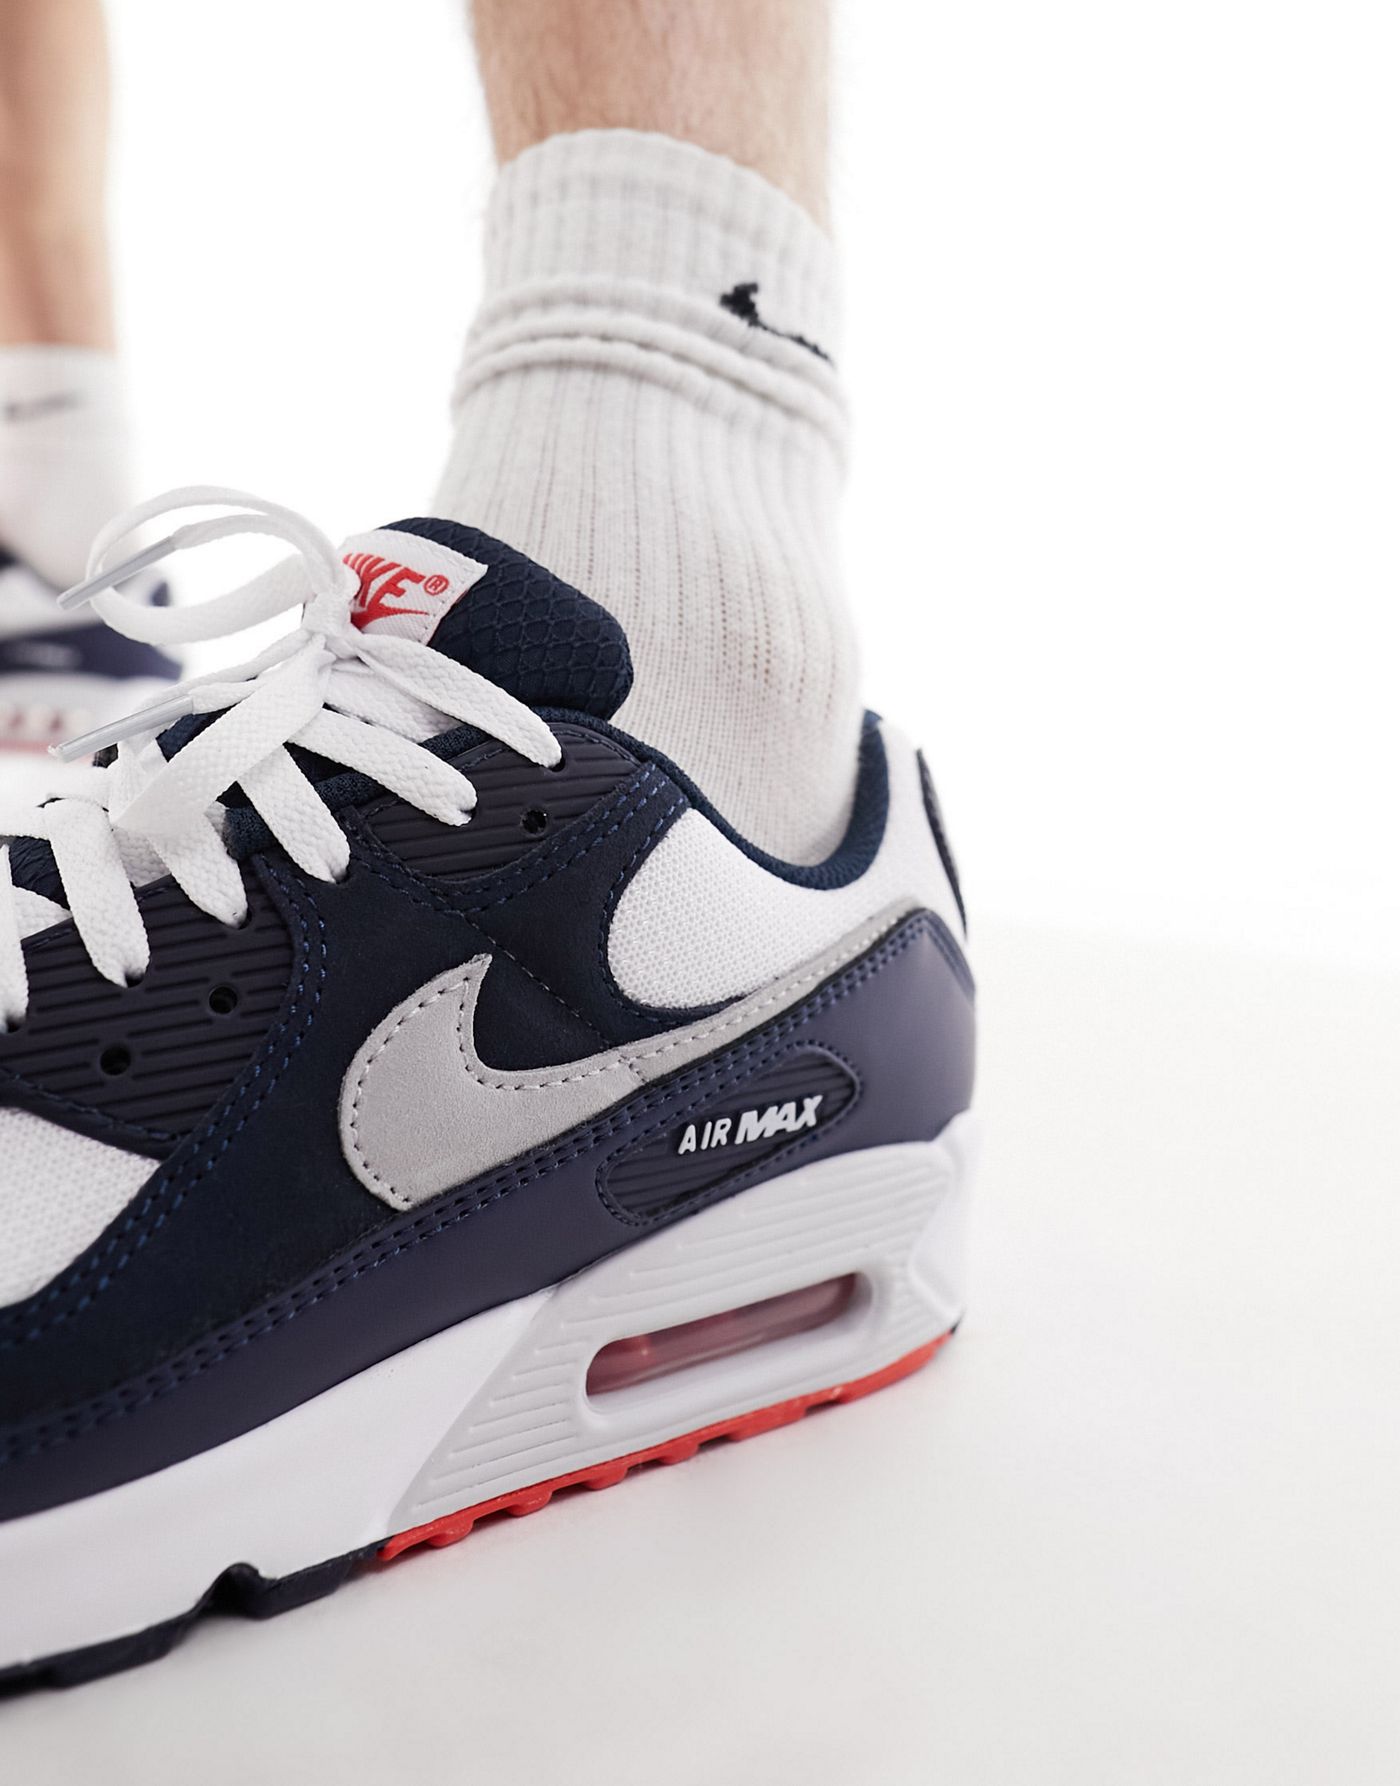 Nike Air Max 90 trainers in navy, white and red